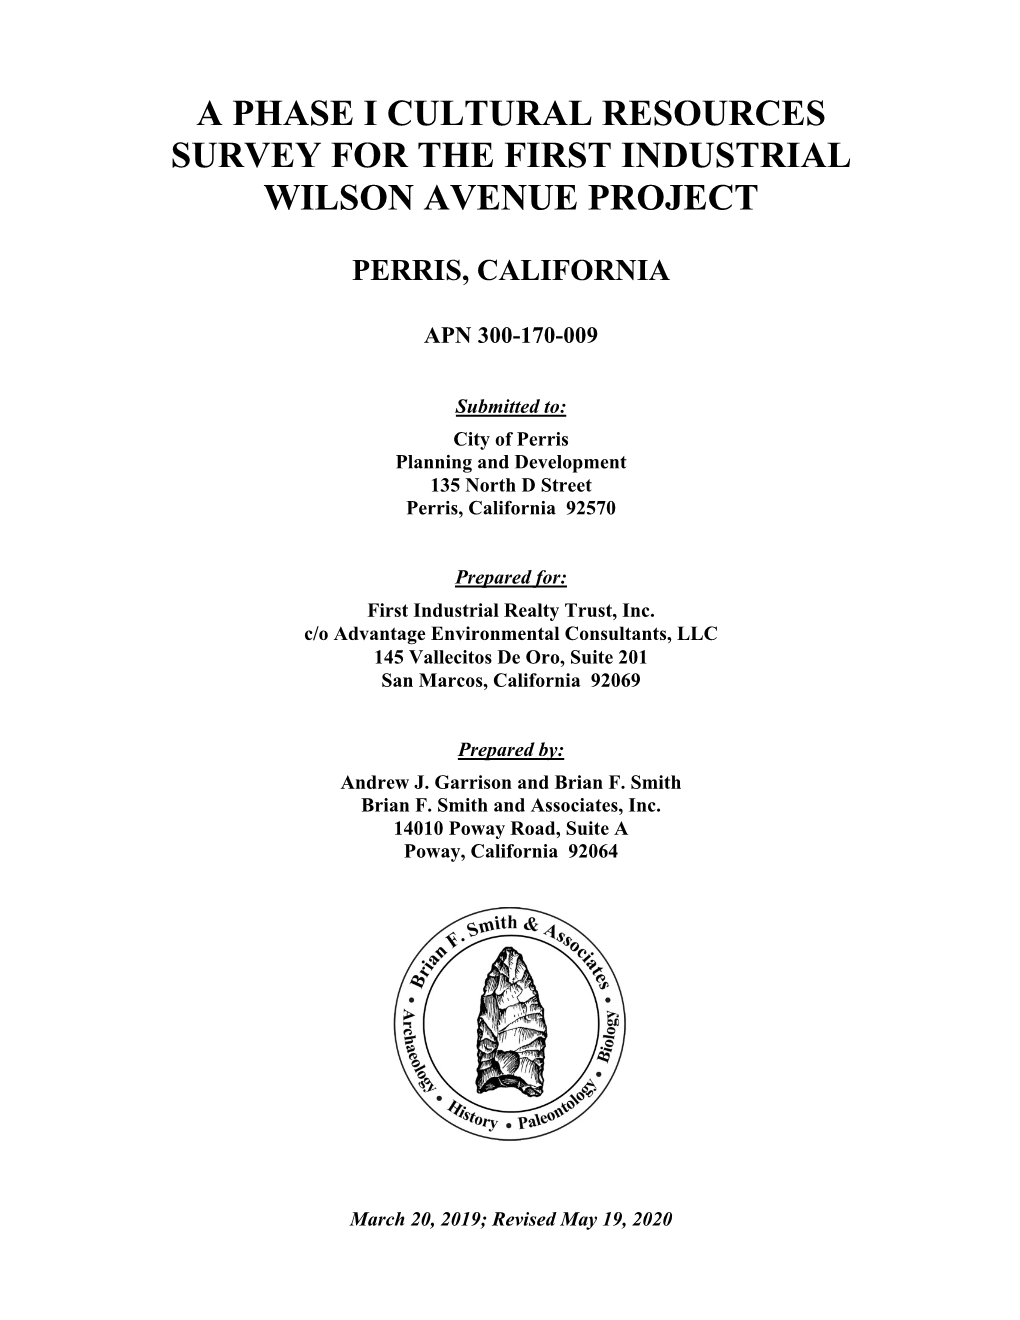 A Phase I Cultural Resources Survey for the First Industrial Wilson Avenue Project